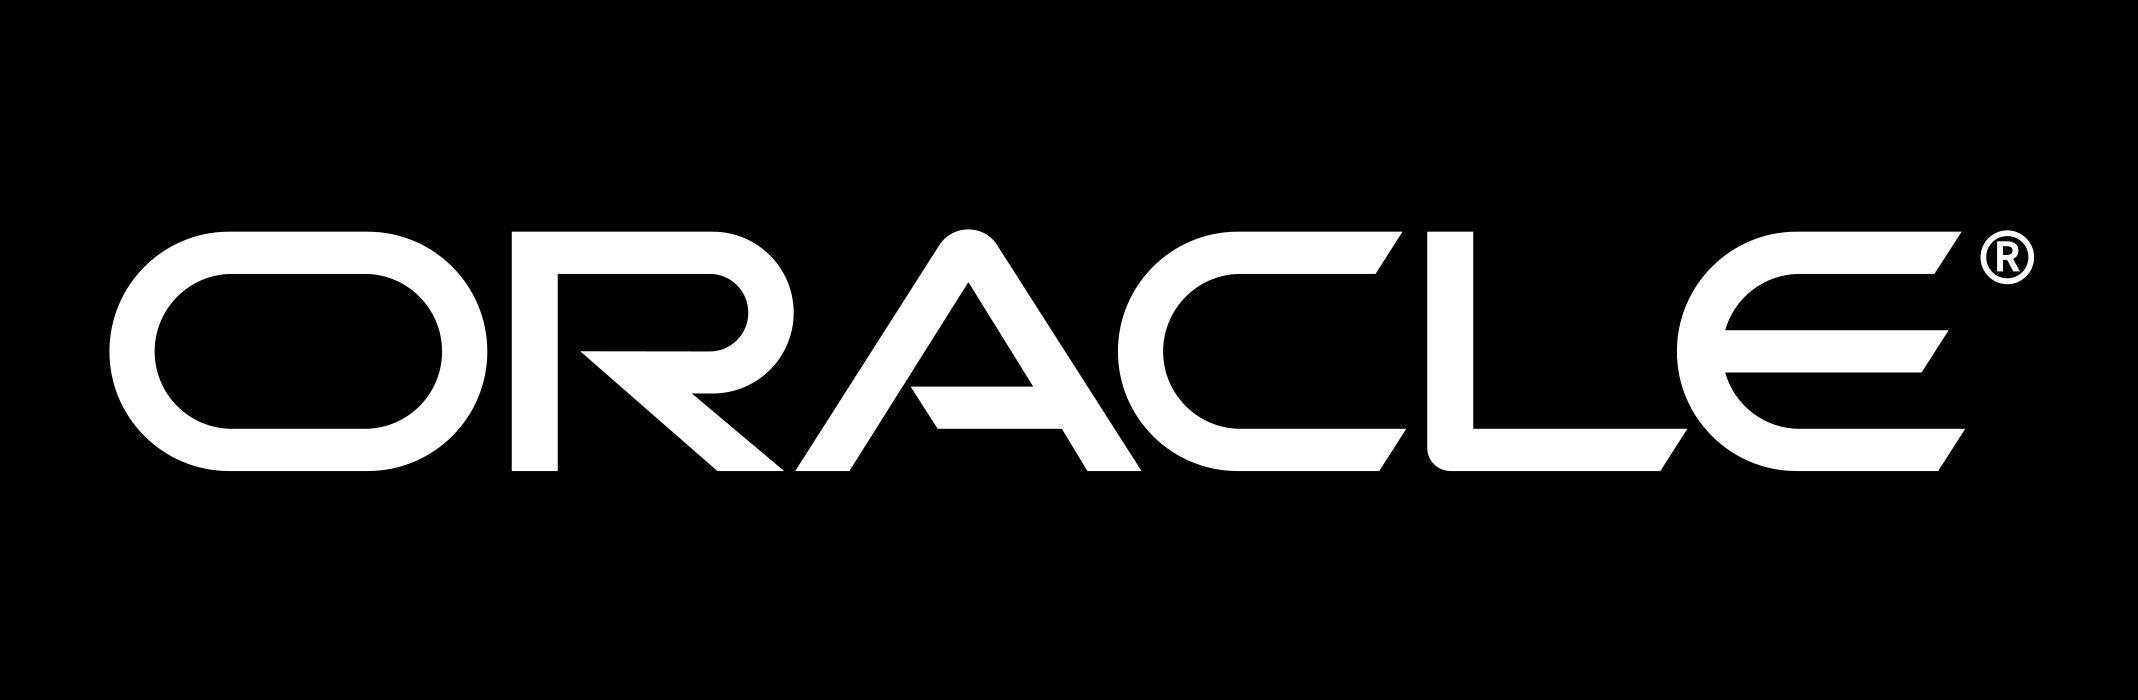 Oracle Logo - Oracle Logo, Oracle Symbol, Meaning, History and Evolution